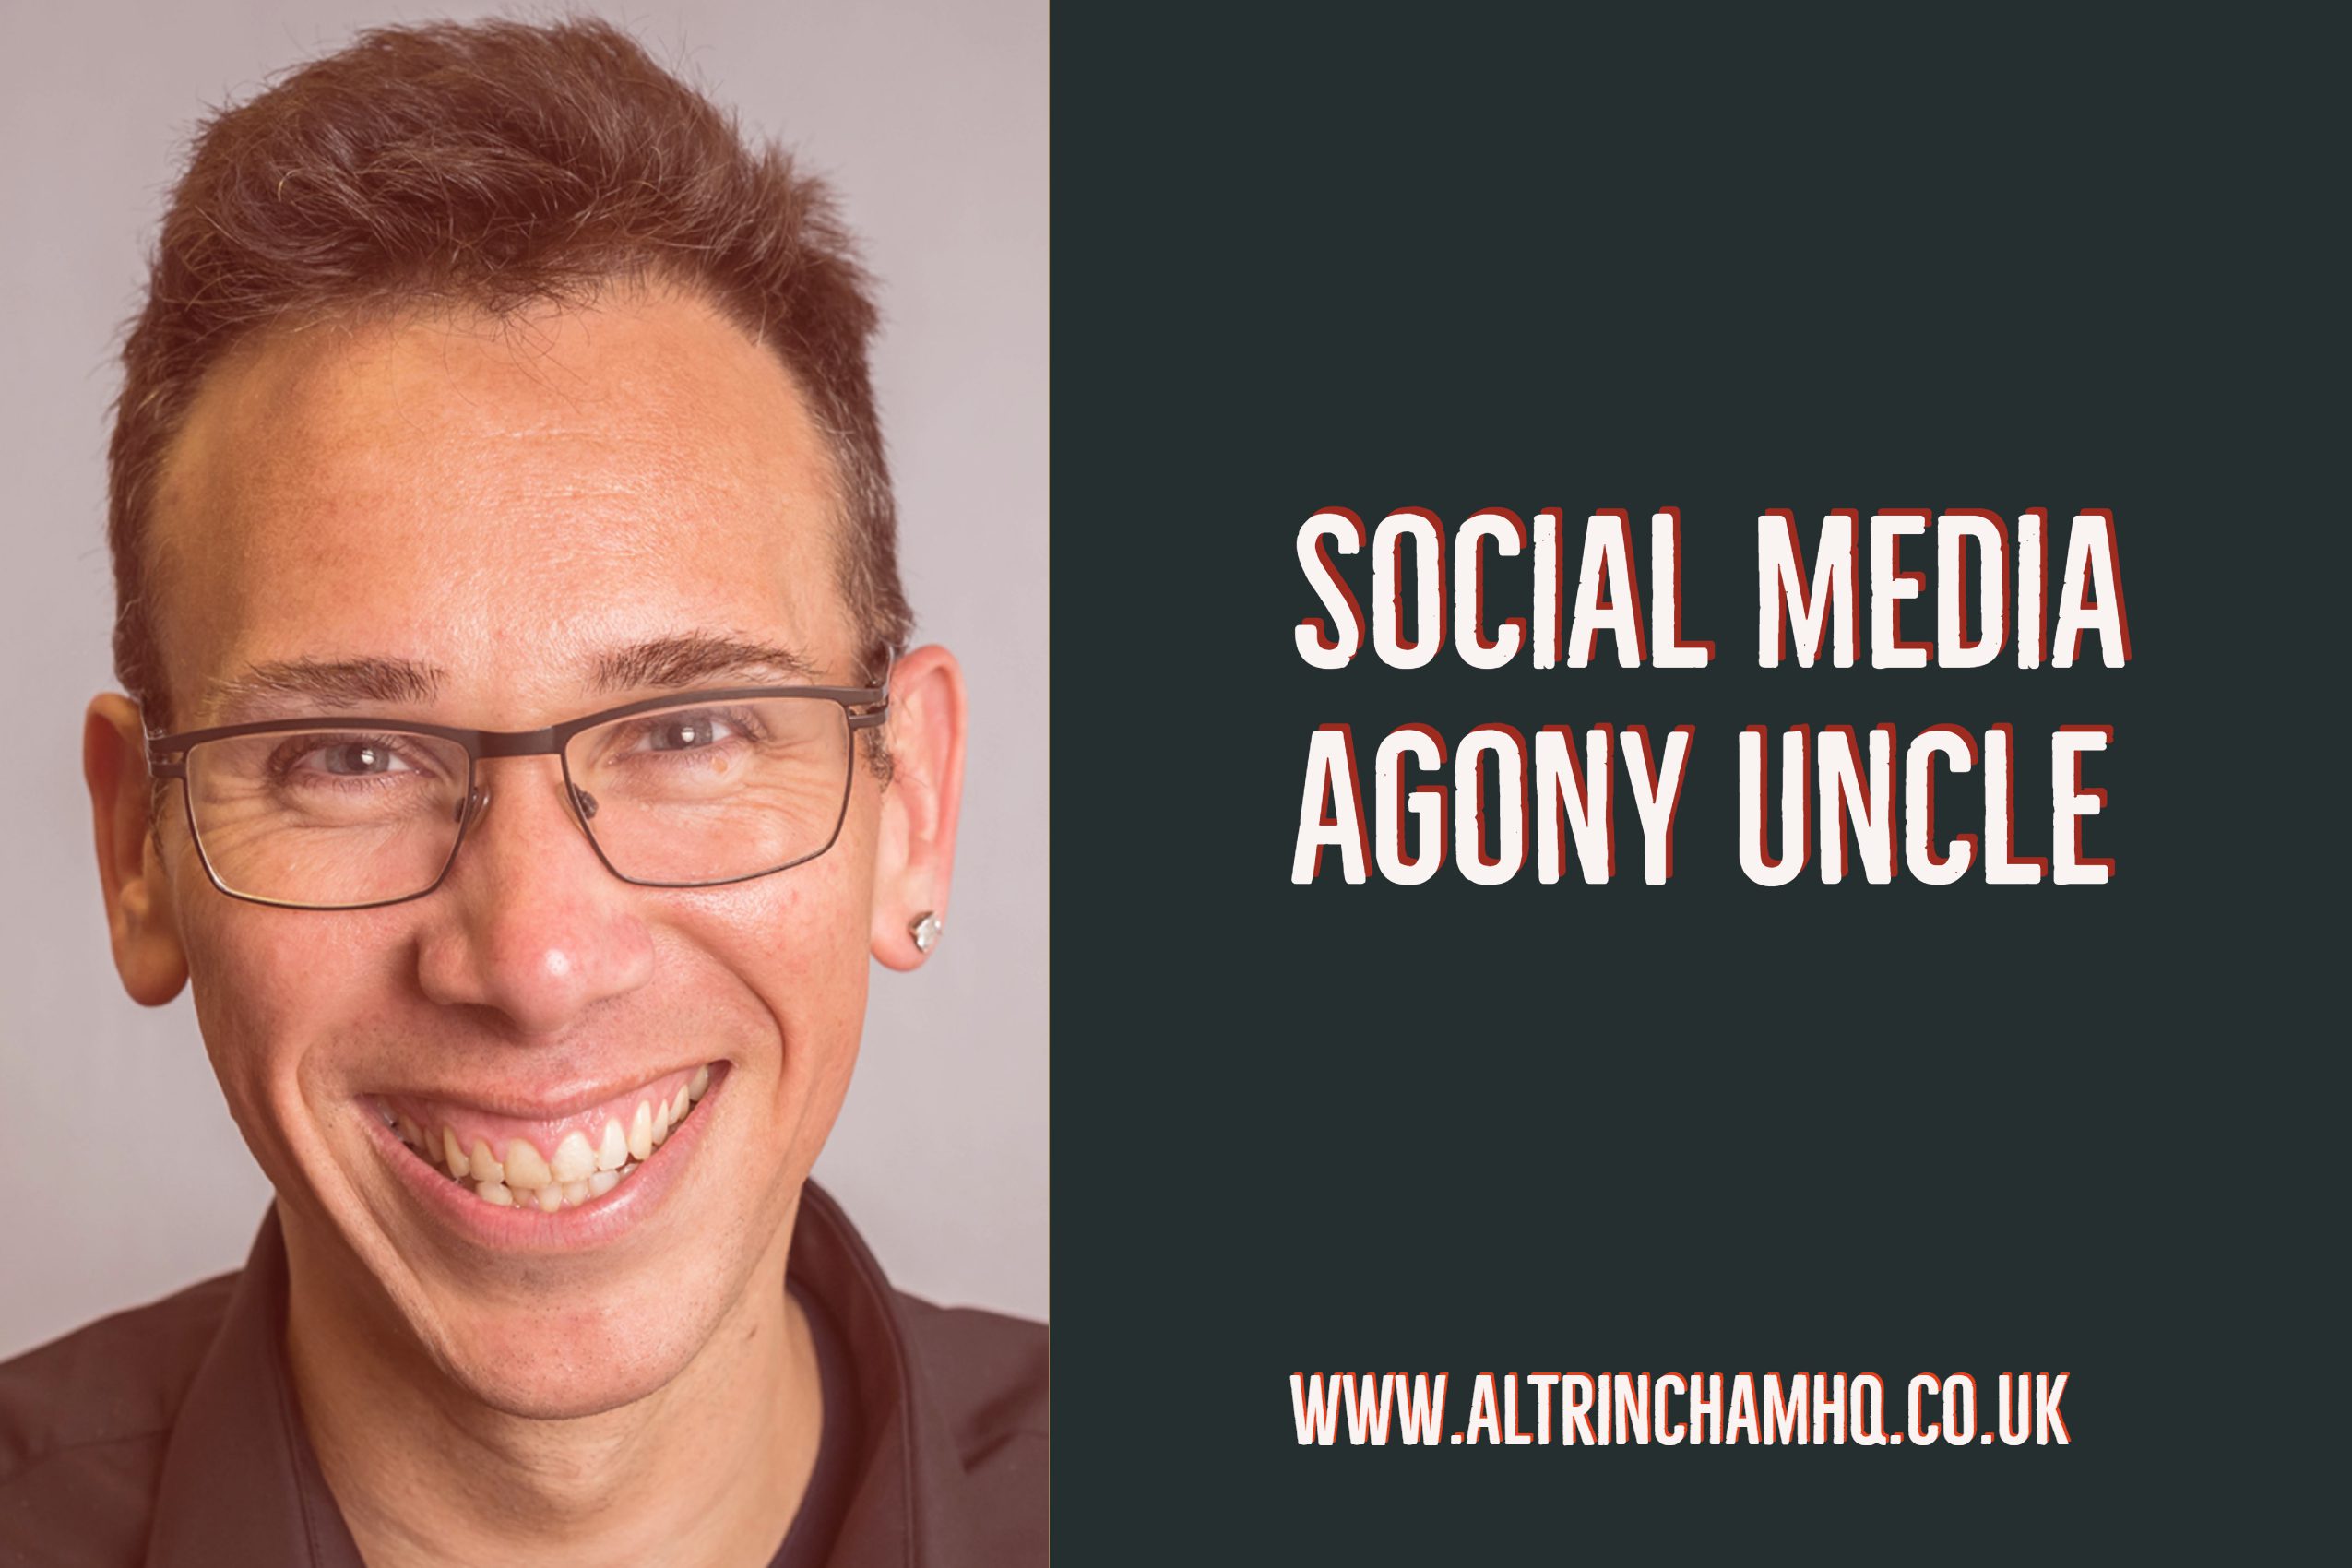 Social Media Agony Uncle: How Do I Make My Business Work When All Attention Is On The Market?